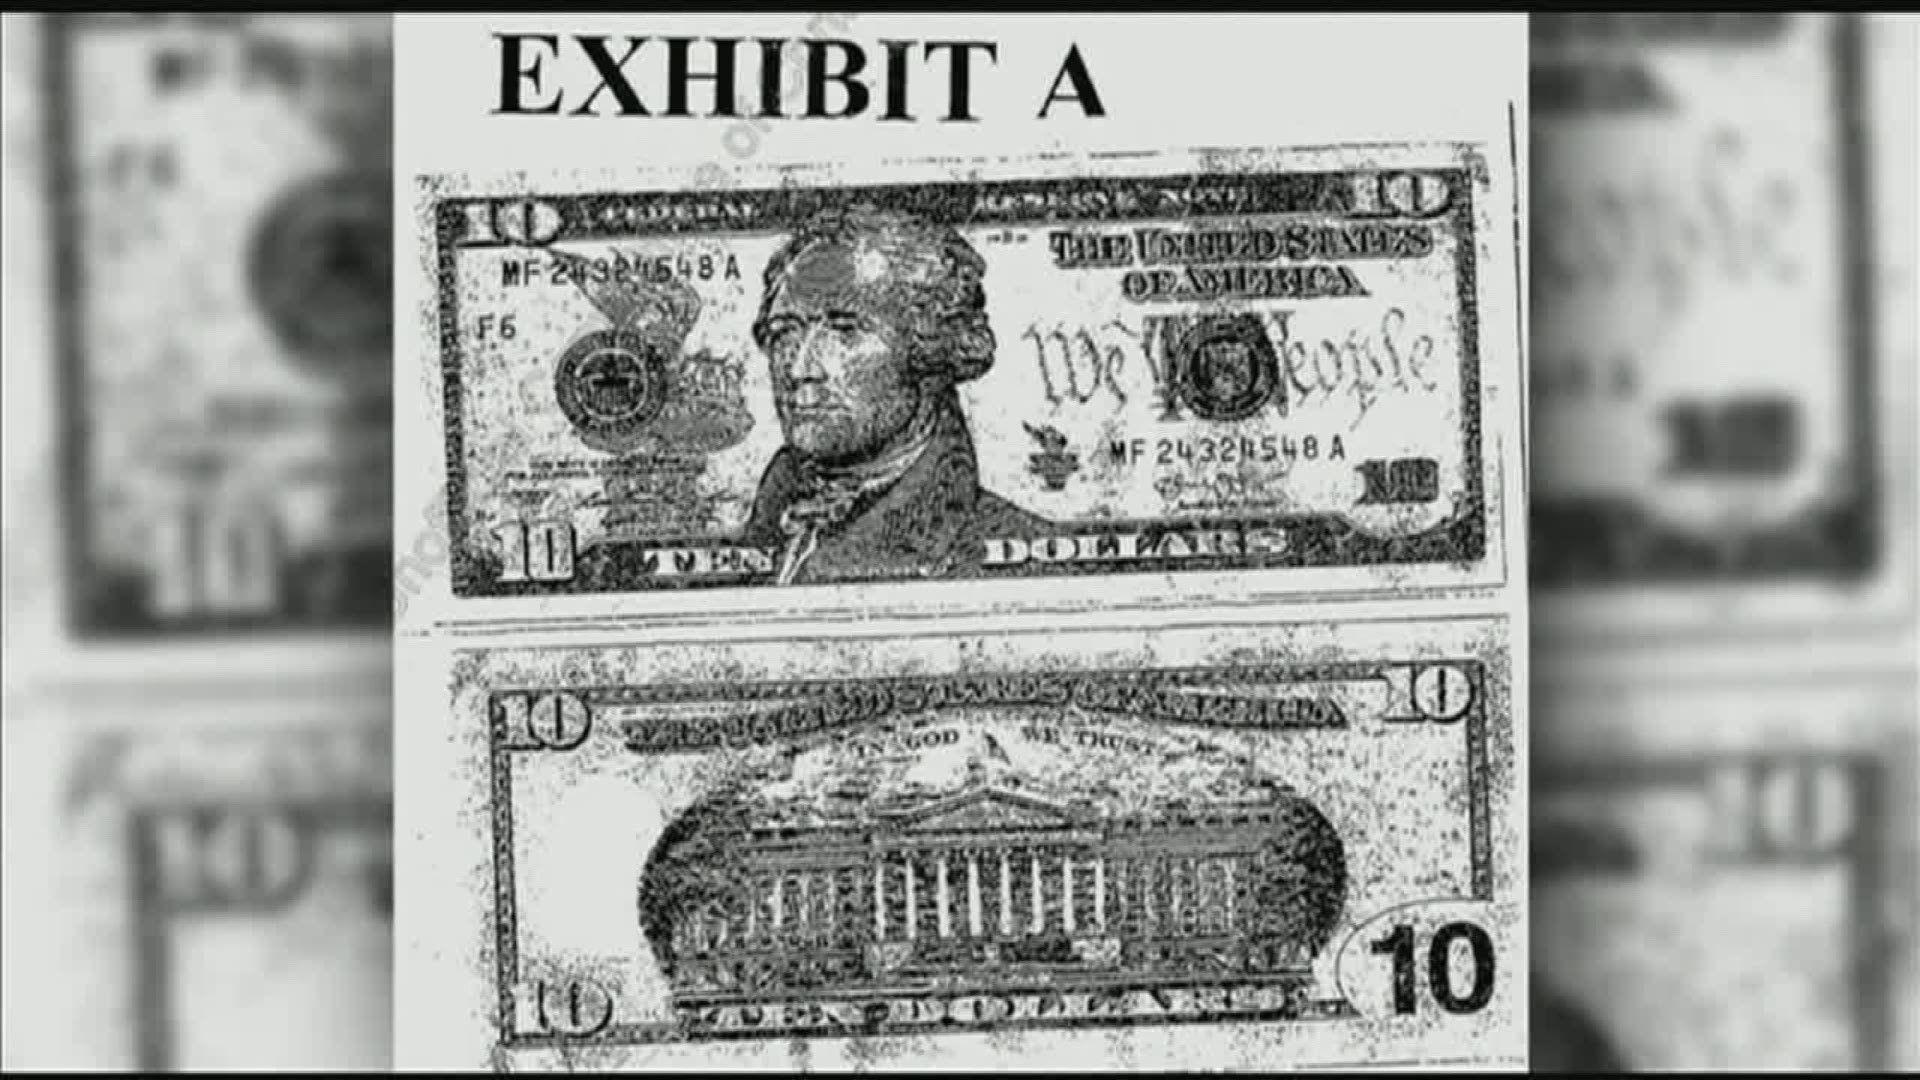 A local man is hoping to avoid jail time after spending a fake ten dollar bill that he thought was real. 